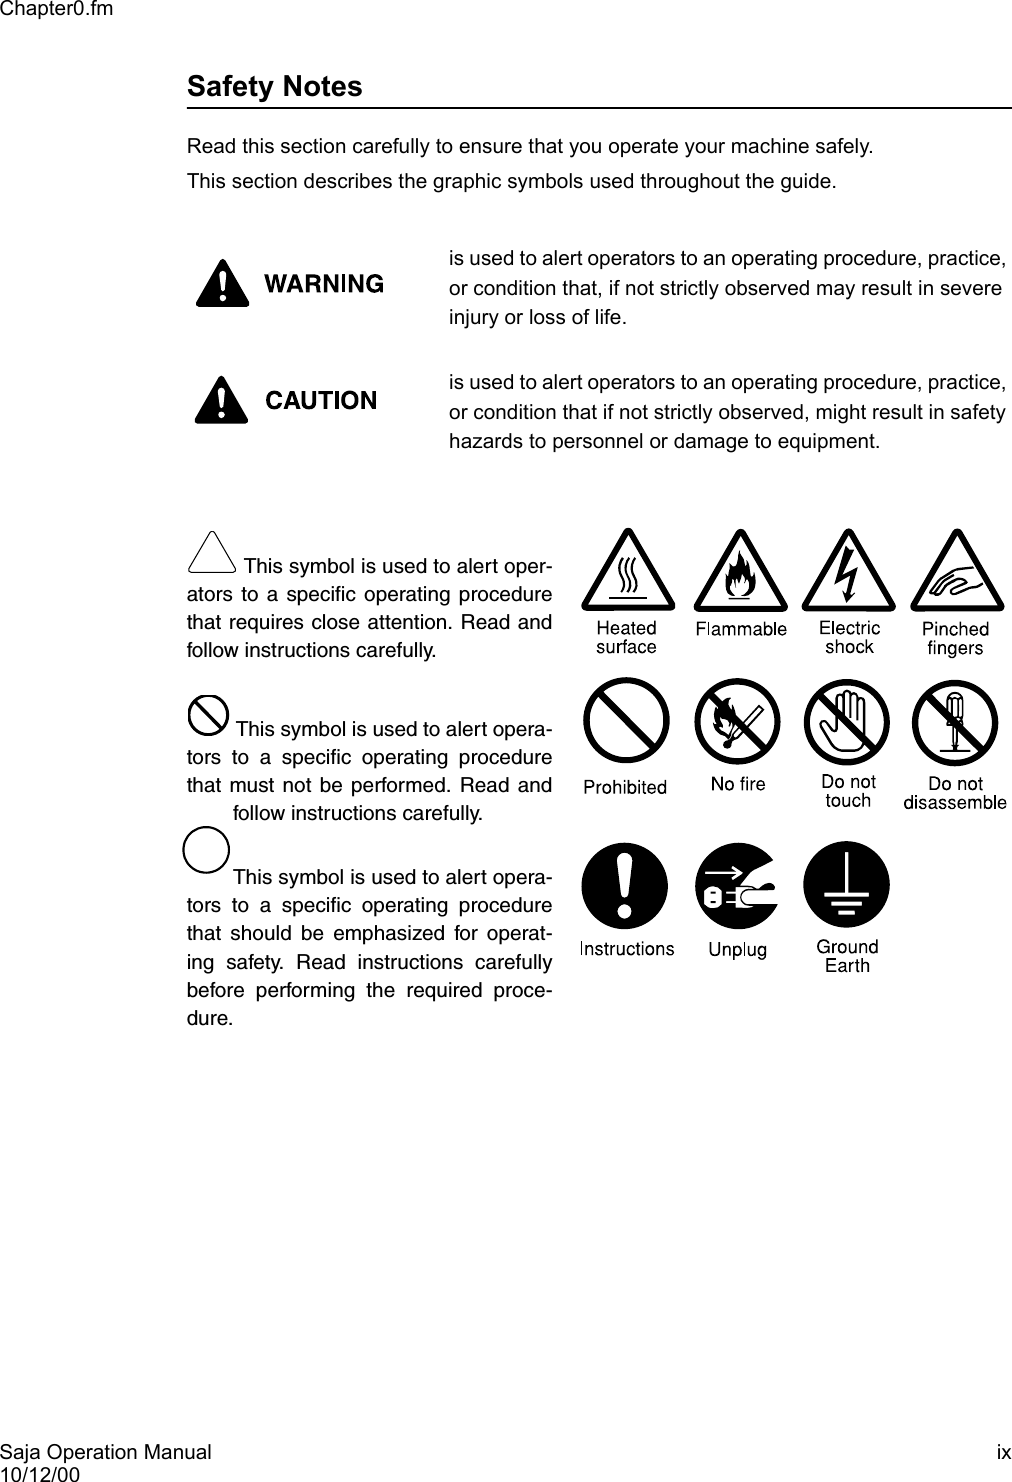 Saja Operation Manual ix10/12/00Chapter0.fmSafety NotesRead this section carefully to ensure that you operate your machine safely.This section describes the graphic symbols used throughout the guide.is used to alert operators to an operating procedure, practice, or condition that, if not strictly observed may result in severe injury or loss of life.is used to alert operators to an operating procedure, practice, or condition that if not strictly observed, might result in safety hazards to personnel or damage to equipment. This symbol is used to alert oper-ators to a specific operating procedurethat requires close attention. Read andfollow instructions carefully. This symbol is used to alert opera-tors to a specific operating procedurethat must not be performed. Read andfollow instructions carefully.This symbol is used to alert opera-tors to a specific operating procedurethat should be emphasized for operat-ing safety. Read instructions carefullybefore performing the required proce-dure.